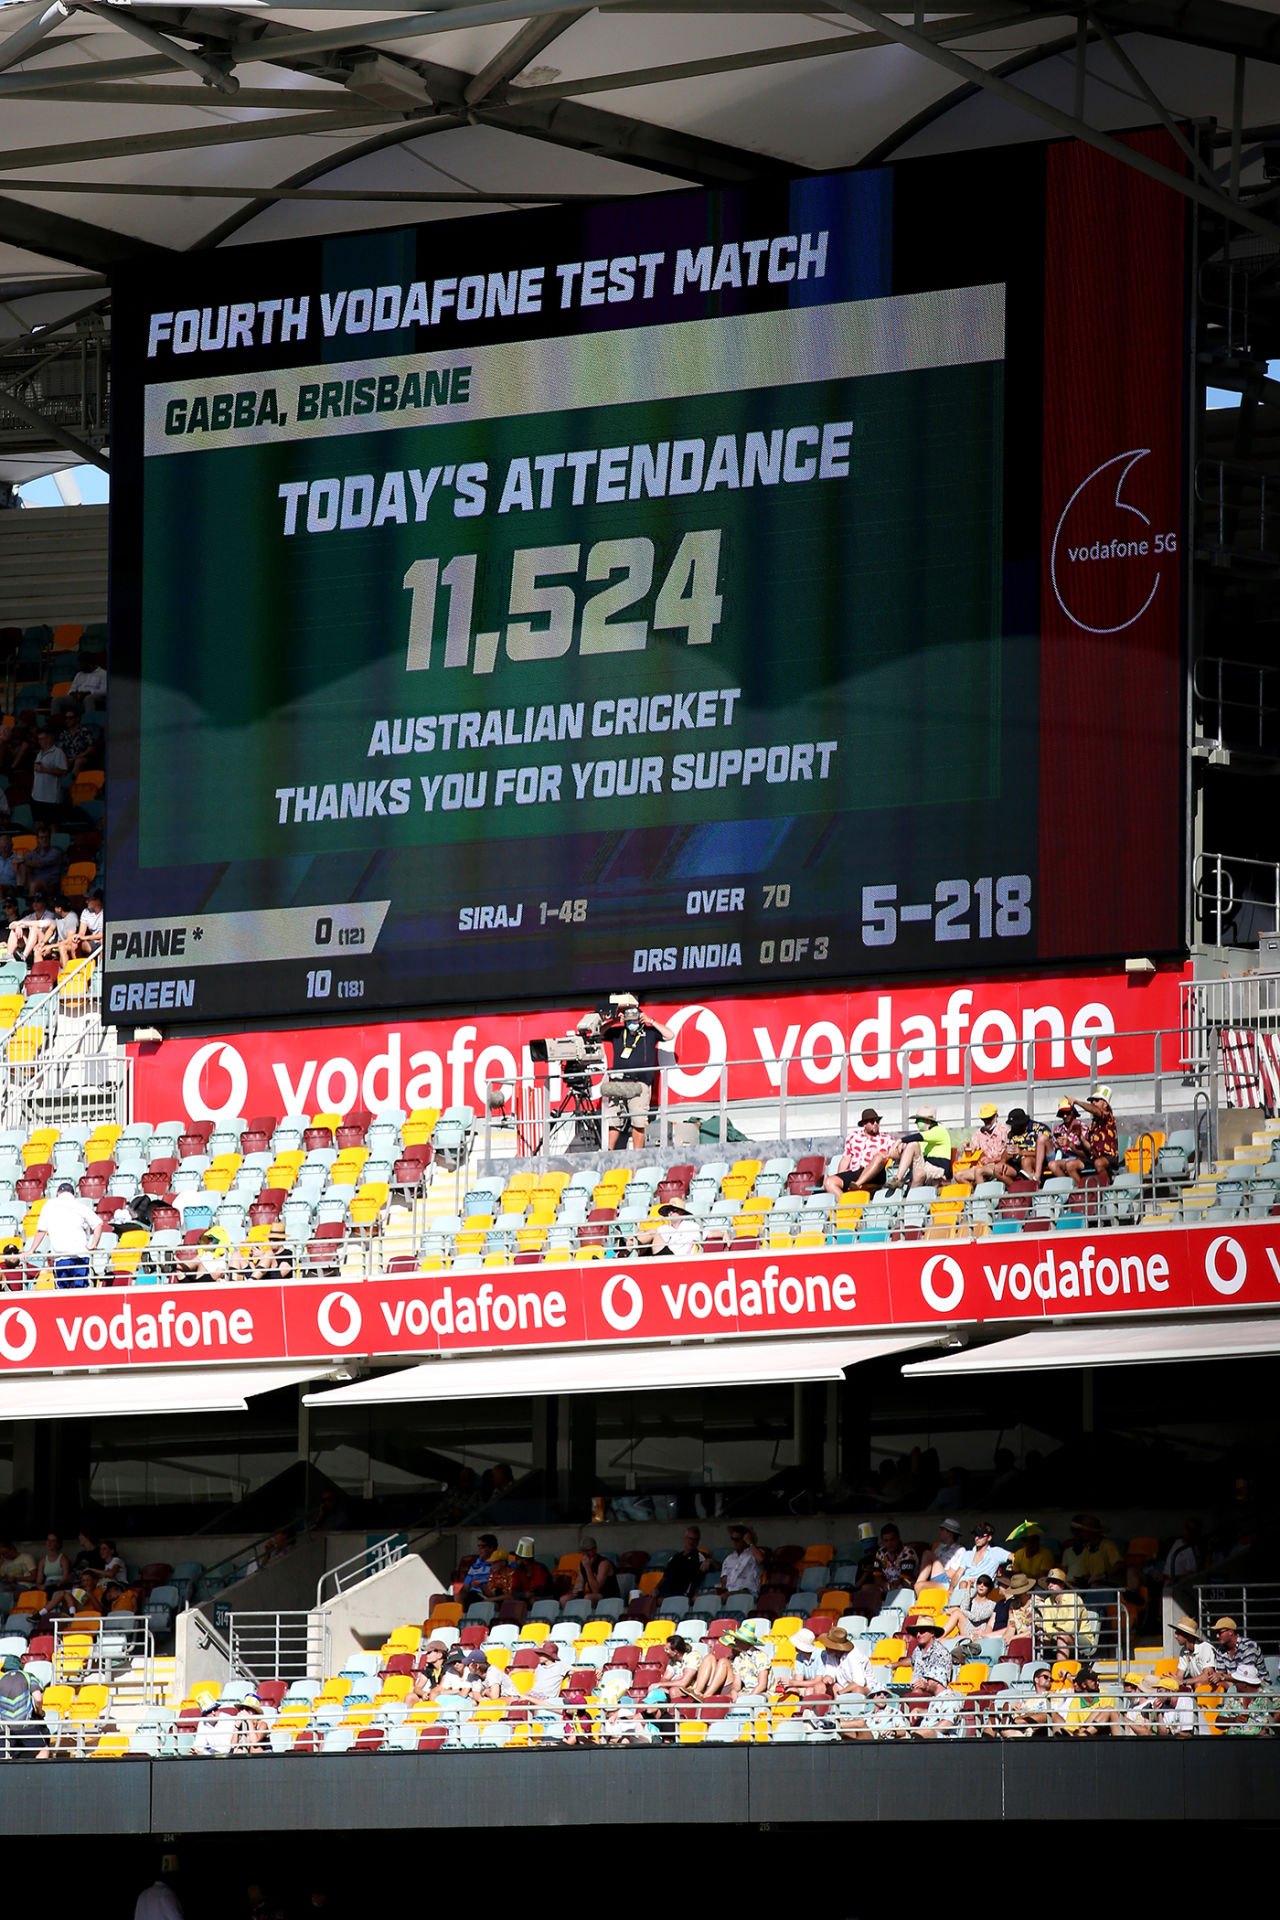 Given the restrictions imposed by Covid-19, an impressive crowd turned up at the Gabba, Australia vs India, 4th Test, Brisbane, January 15, 2021